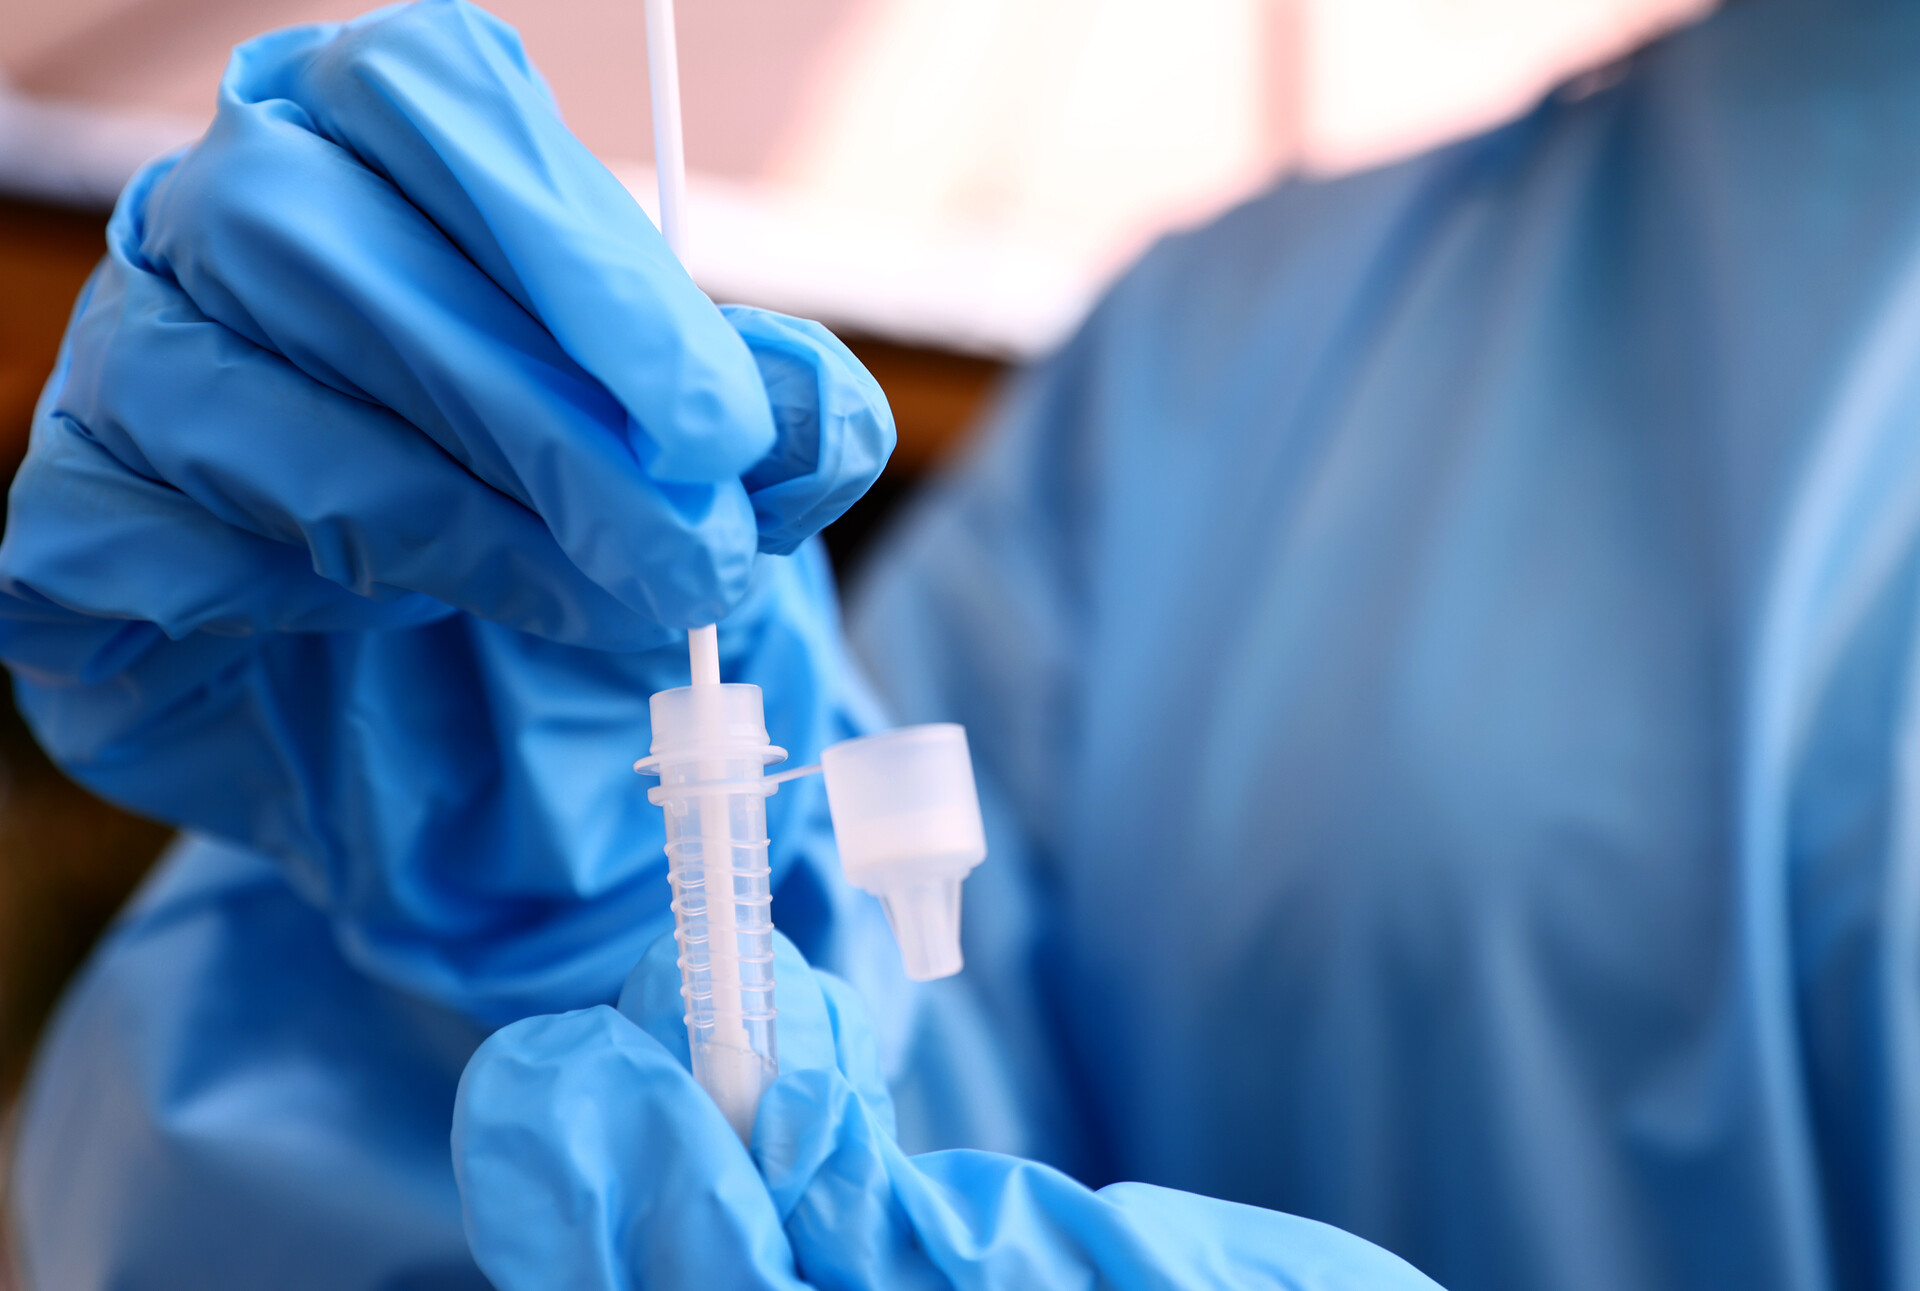 A gloved blue hands held by a nurse in a blue robe hold a small white COVID-19 testing vial and swab.